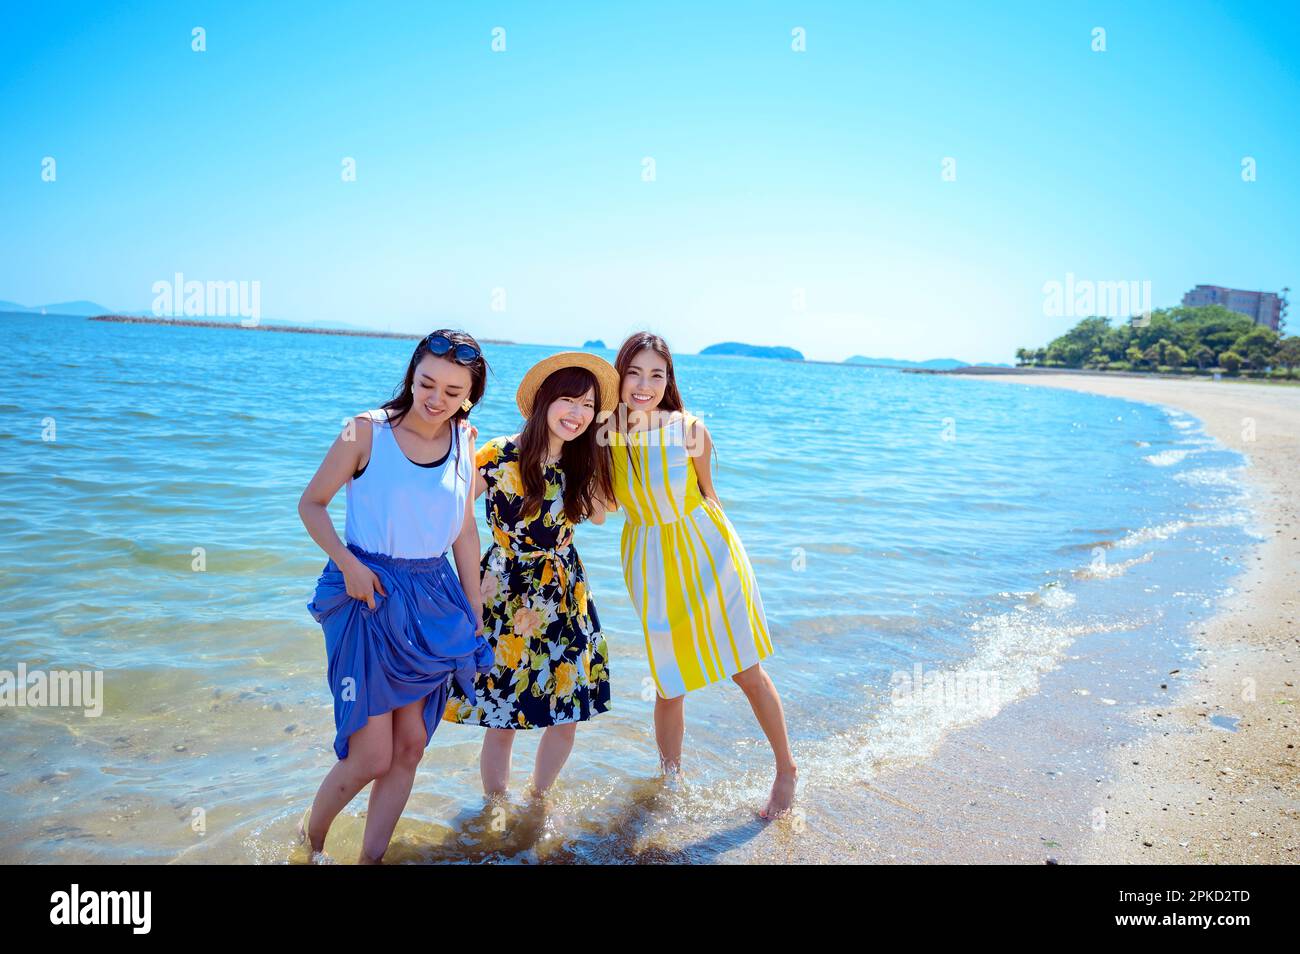 3 women traveling to a sea resort playing on the beach Stock Photo